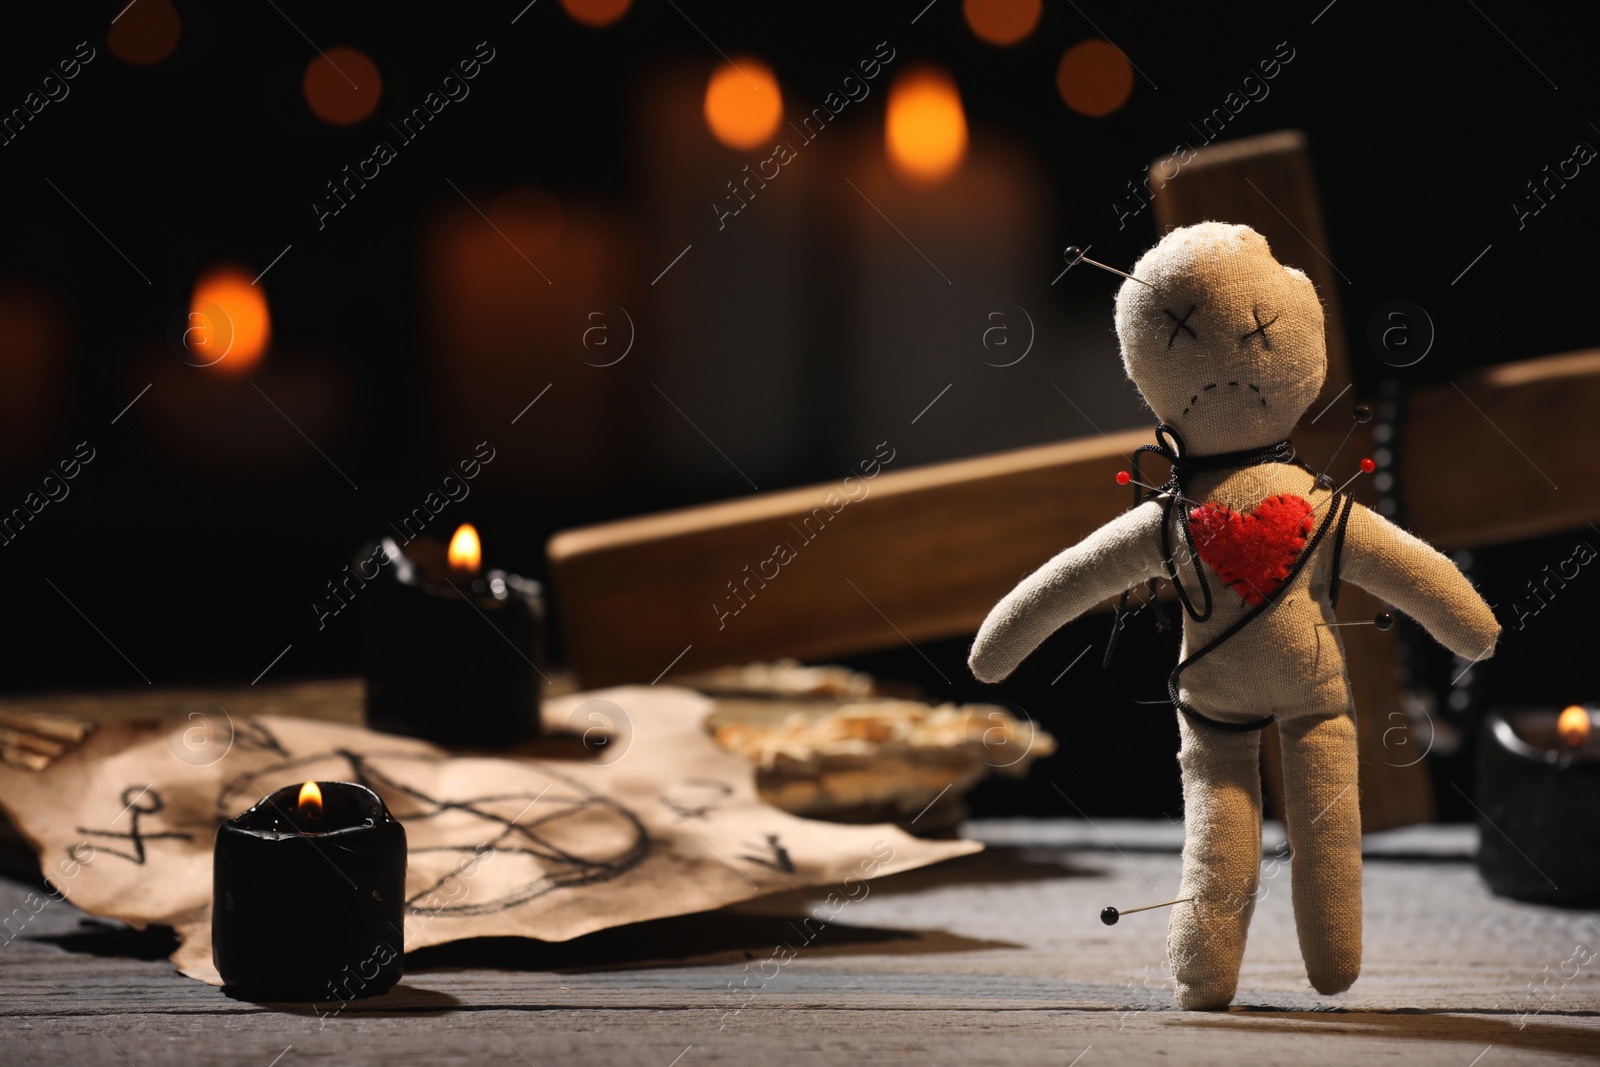 Photo of Voodoo doll pierced with pins and ceremonial items on wooden table against blurred background